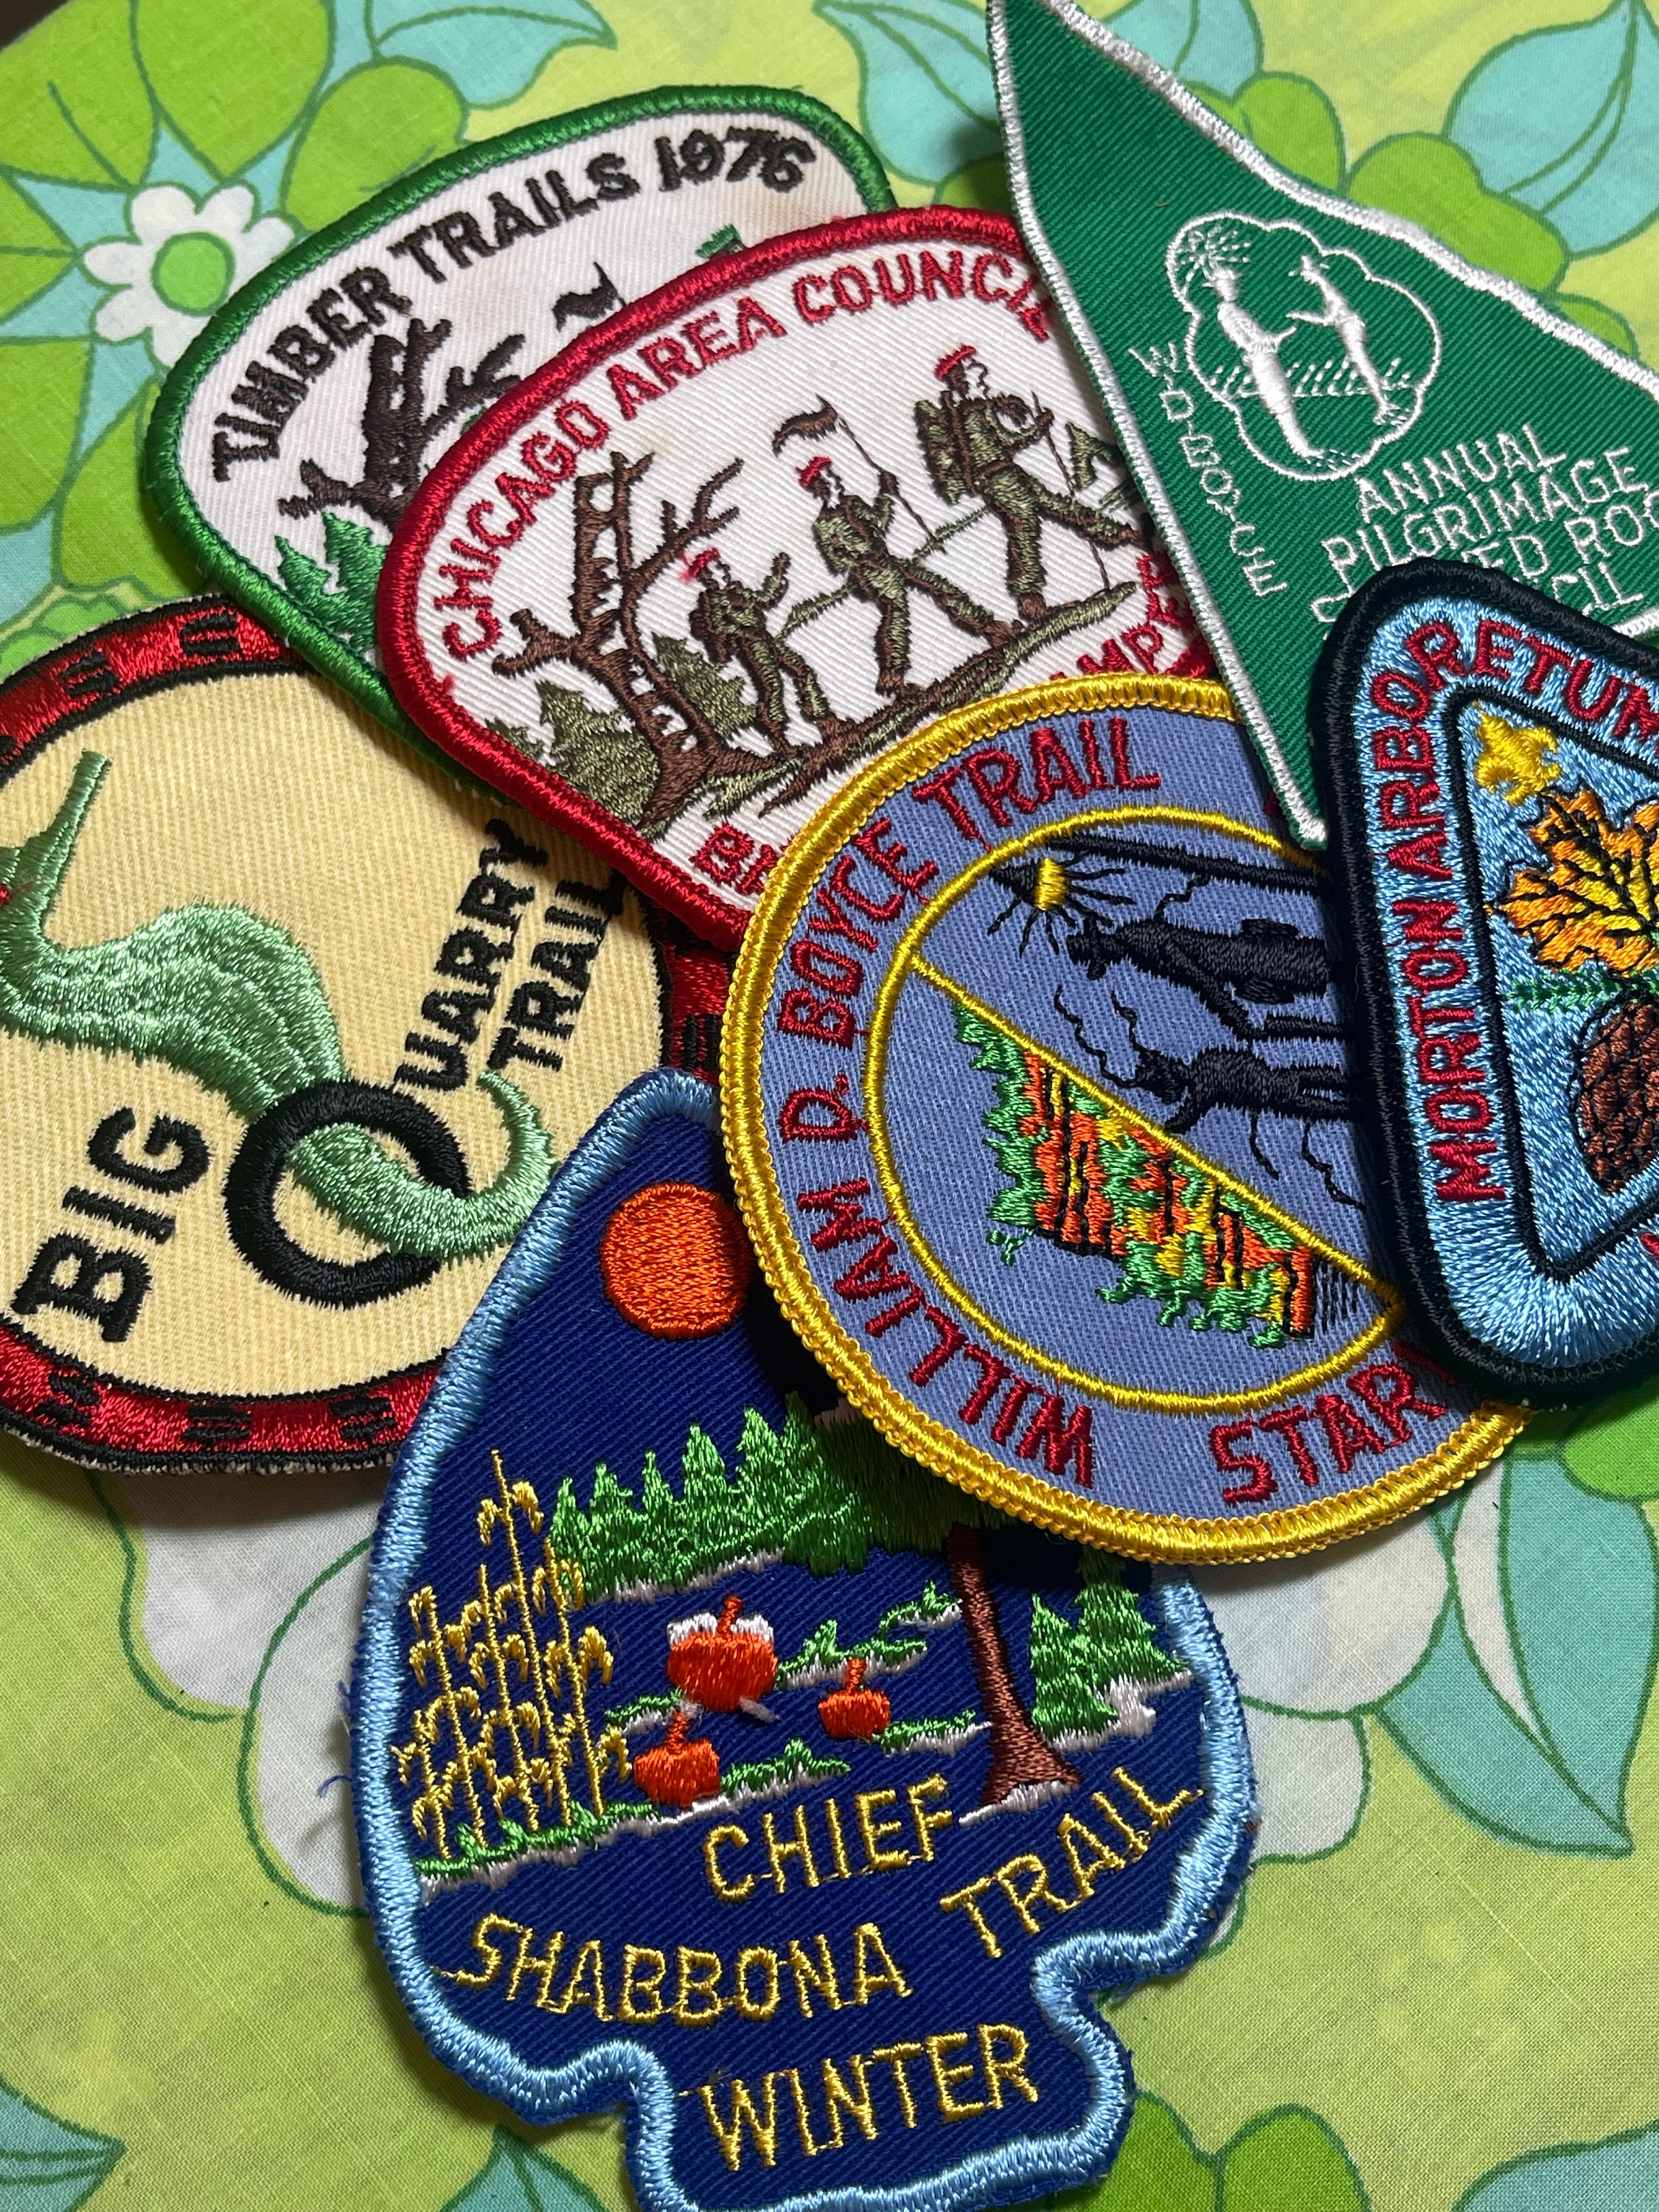 The Best Custom Scout Patches- Low Price & High Quality